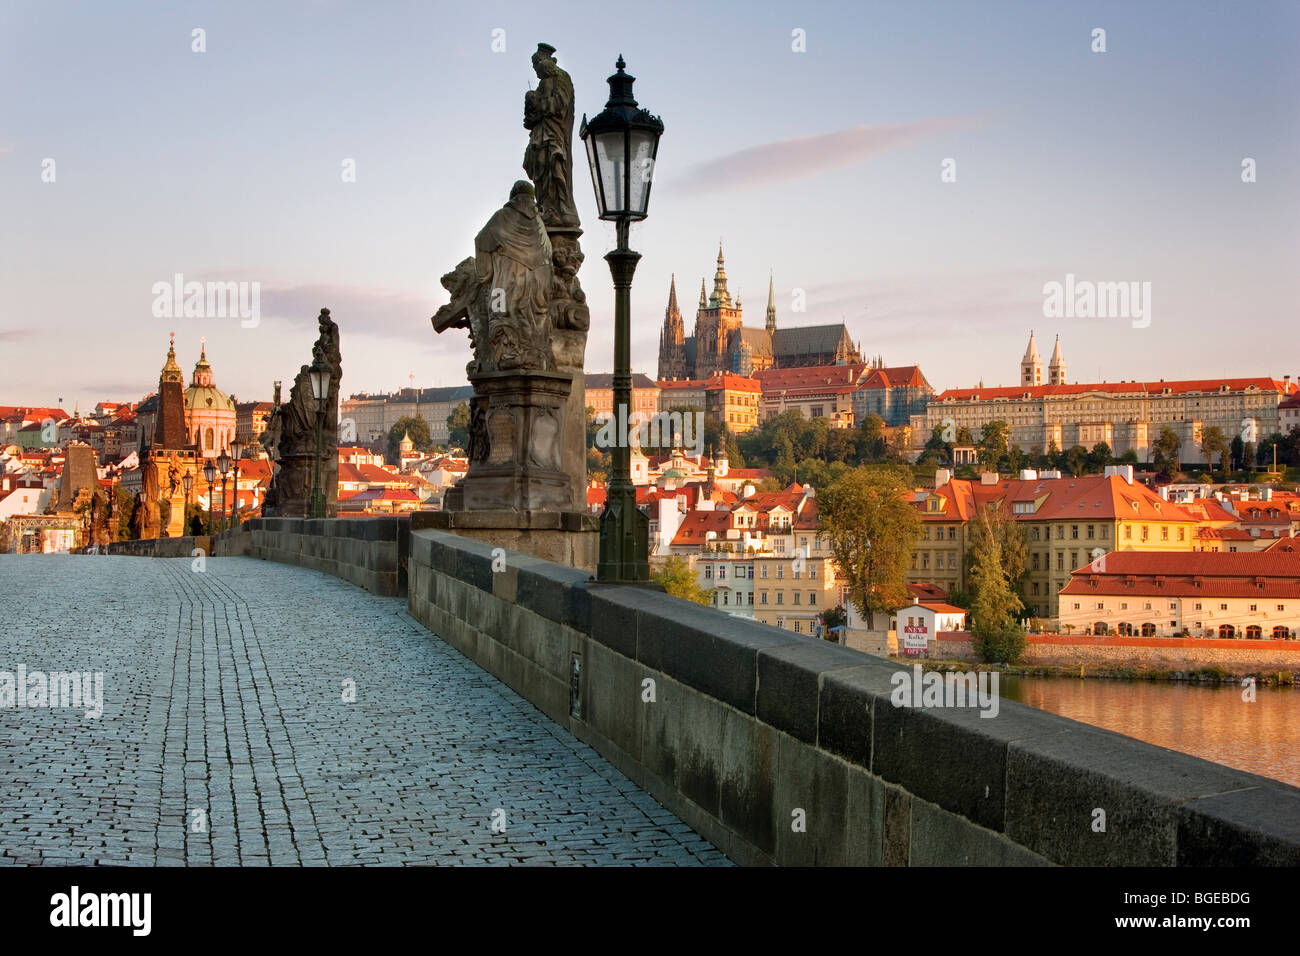 View of Charles' Bridge by Vltava River with Prague Castle in the distance. Shot in Prague, Czech Republic. Stock Photo